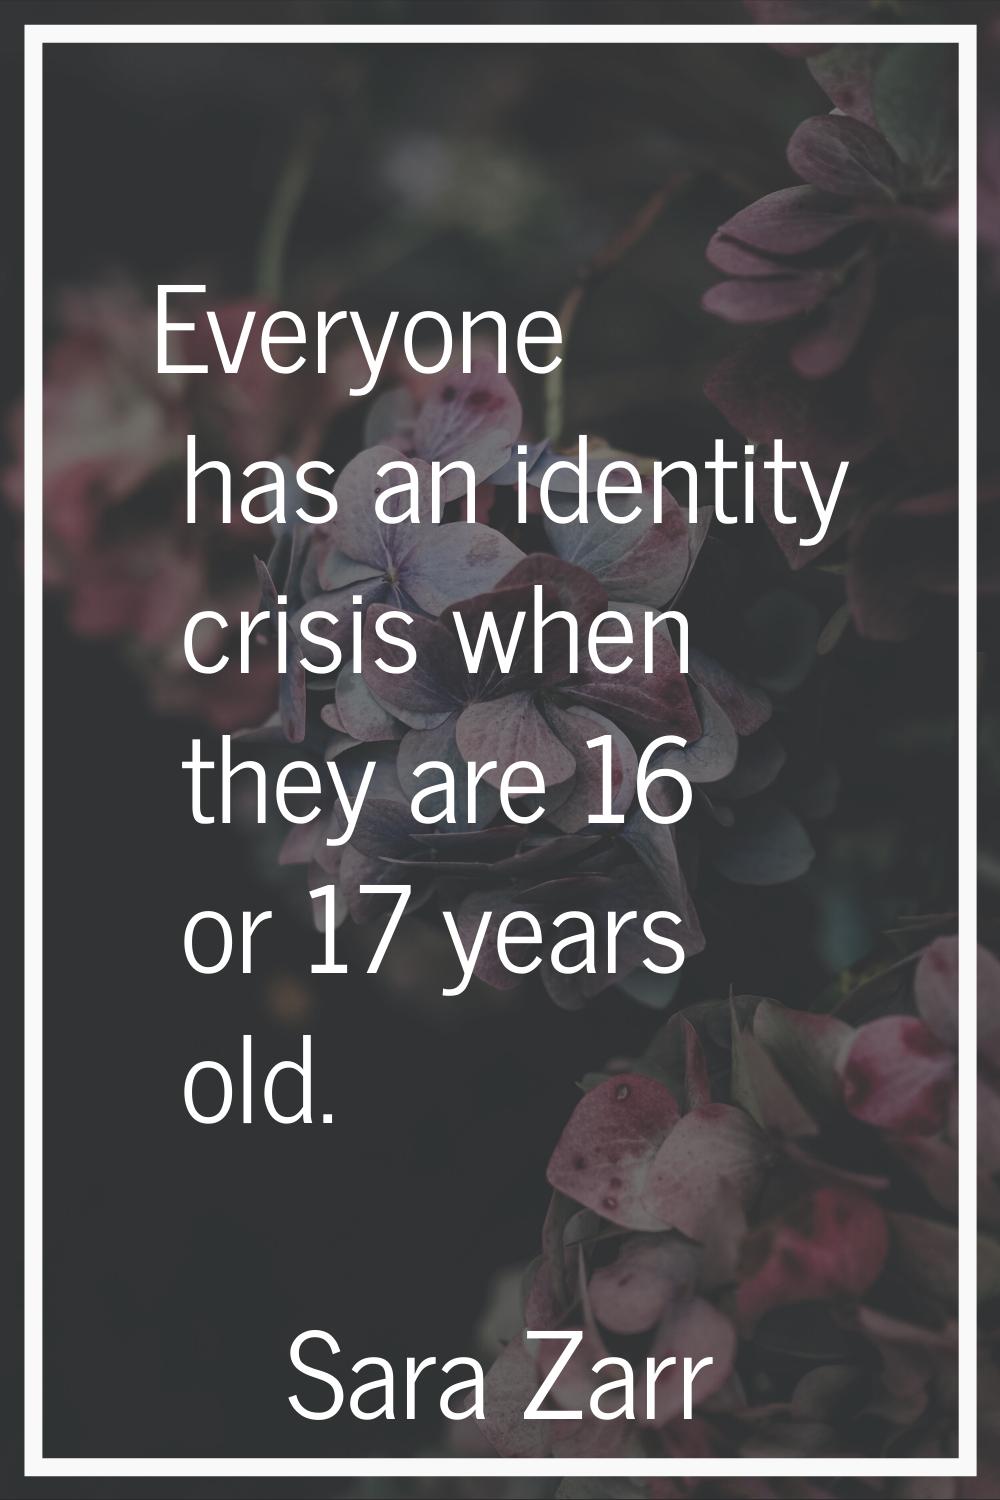 Everyone has an identity crisis when they are 16 or 17 years old.